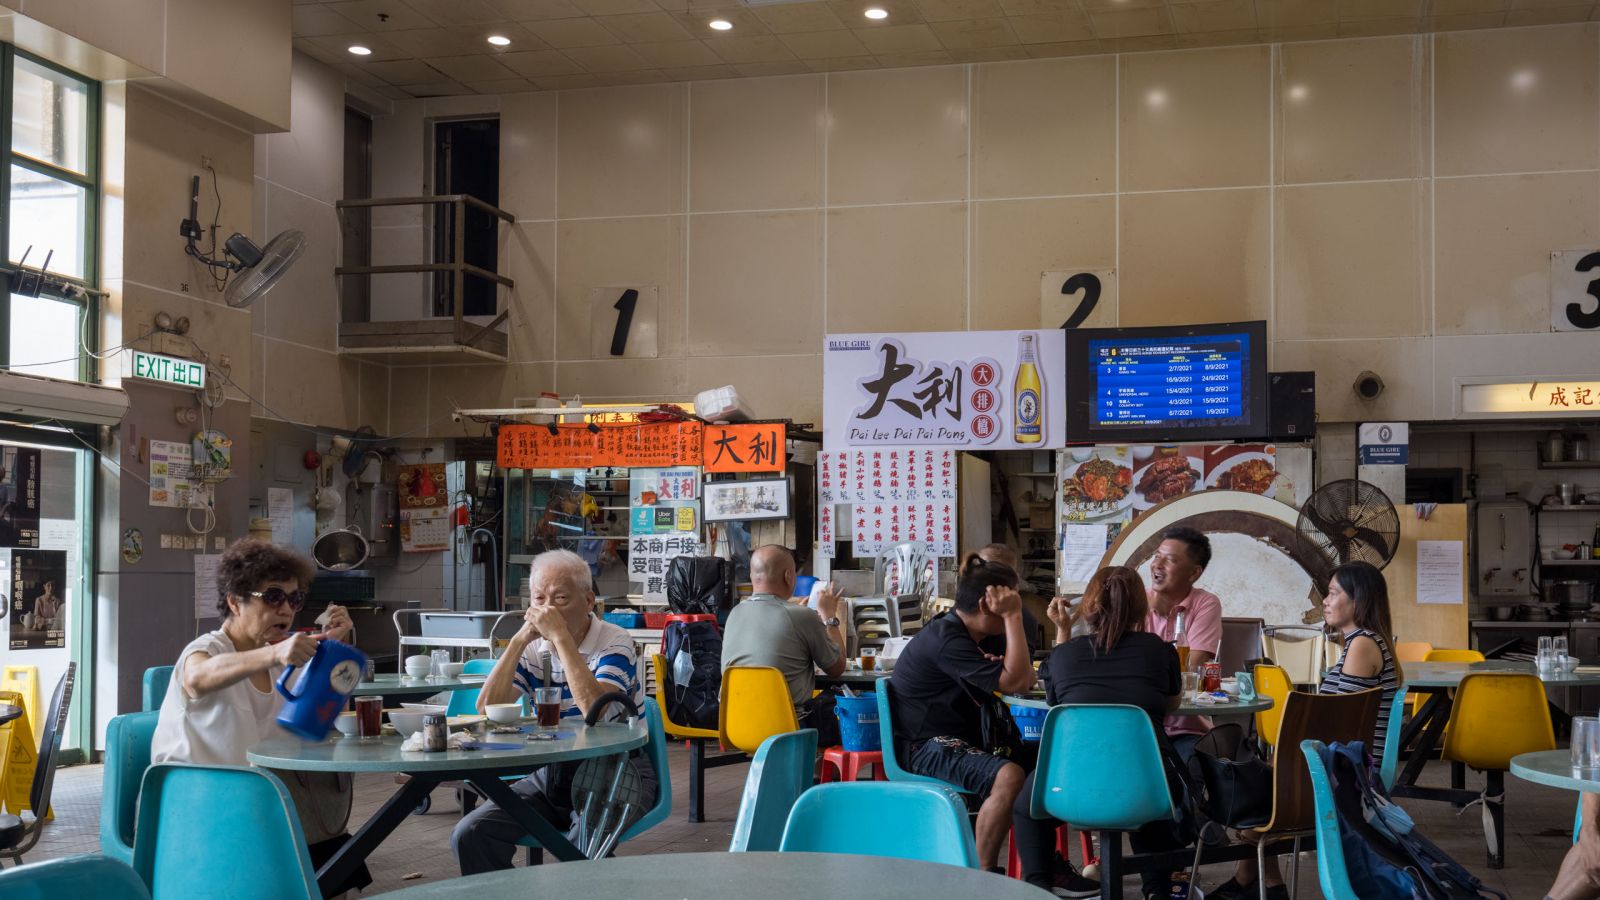 Inside look of Pei Ho Street Cooked Food Centre